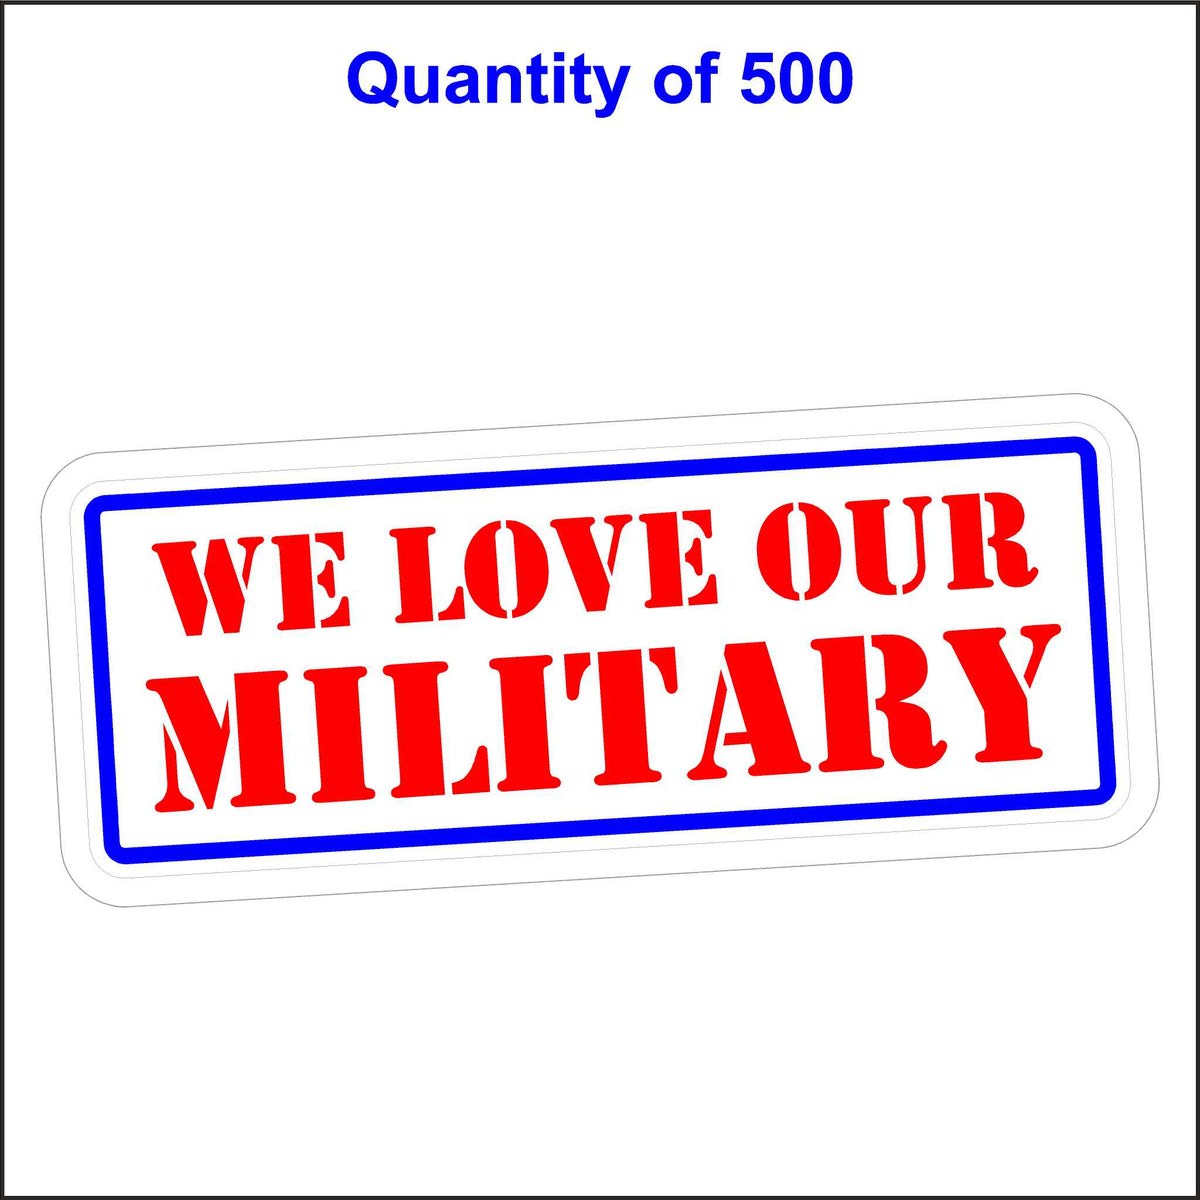 We Love Our Military Sticker. 500 Quantity.